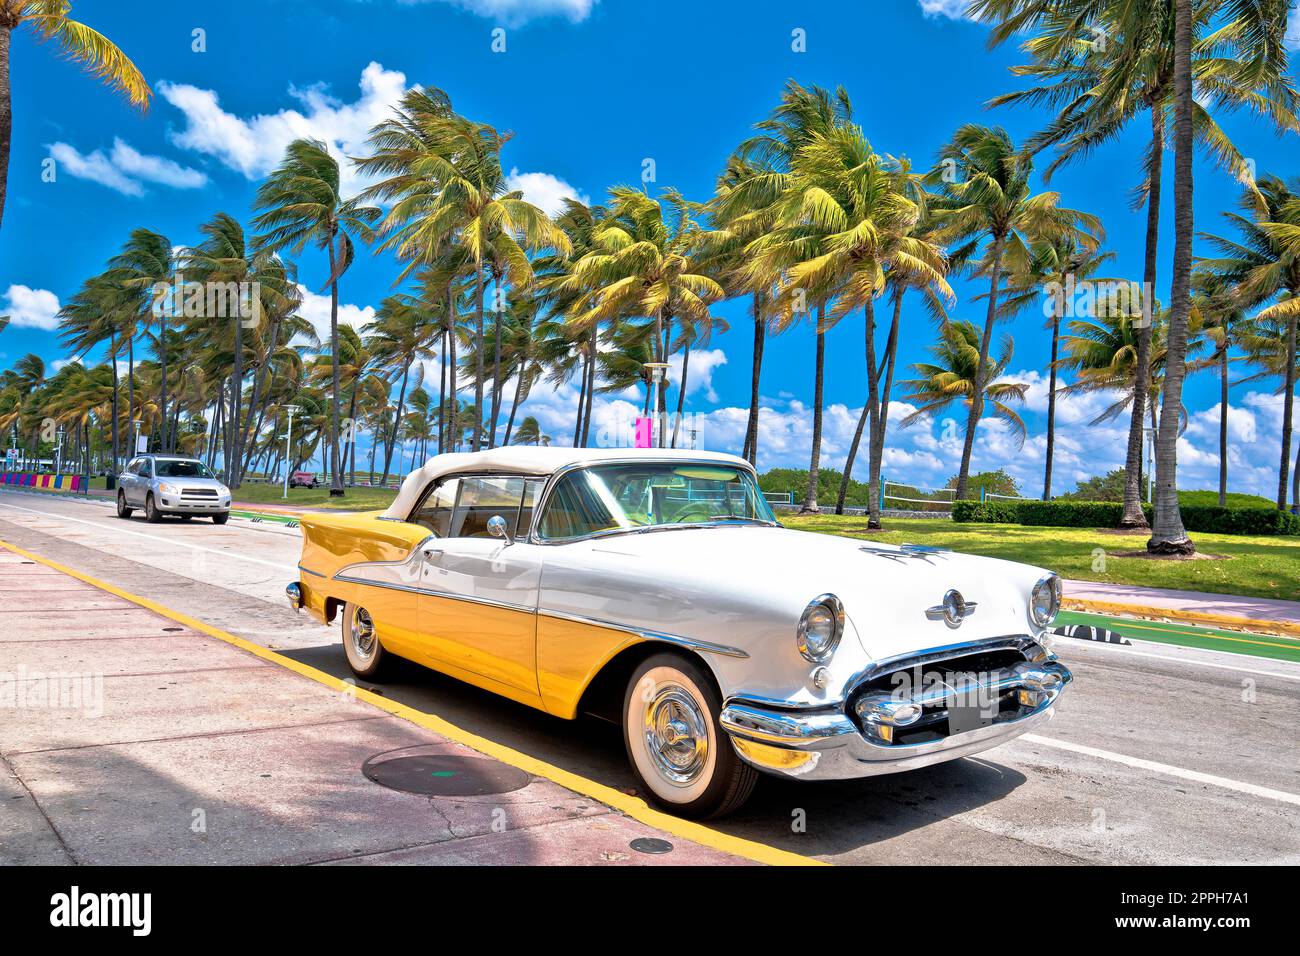 Miami South Beach Ocean Drive palms and beachfront colorful view Stock Photo